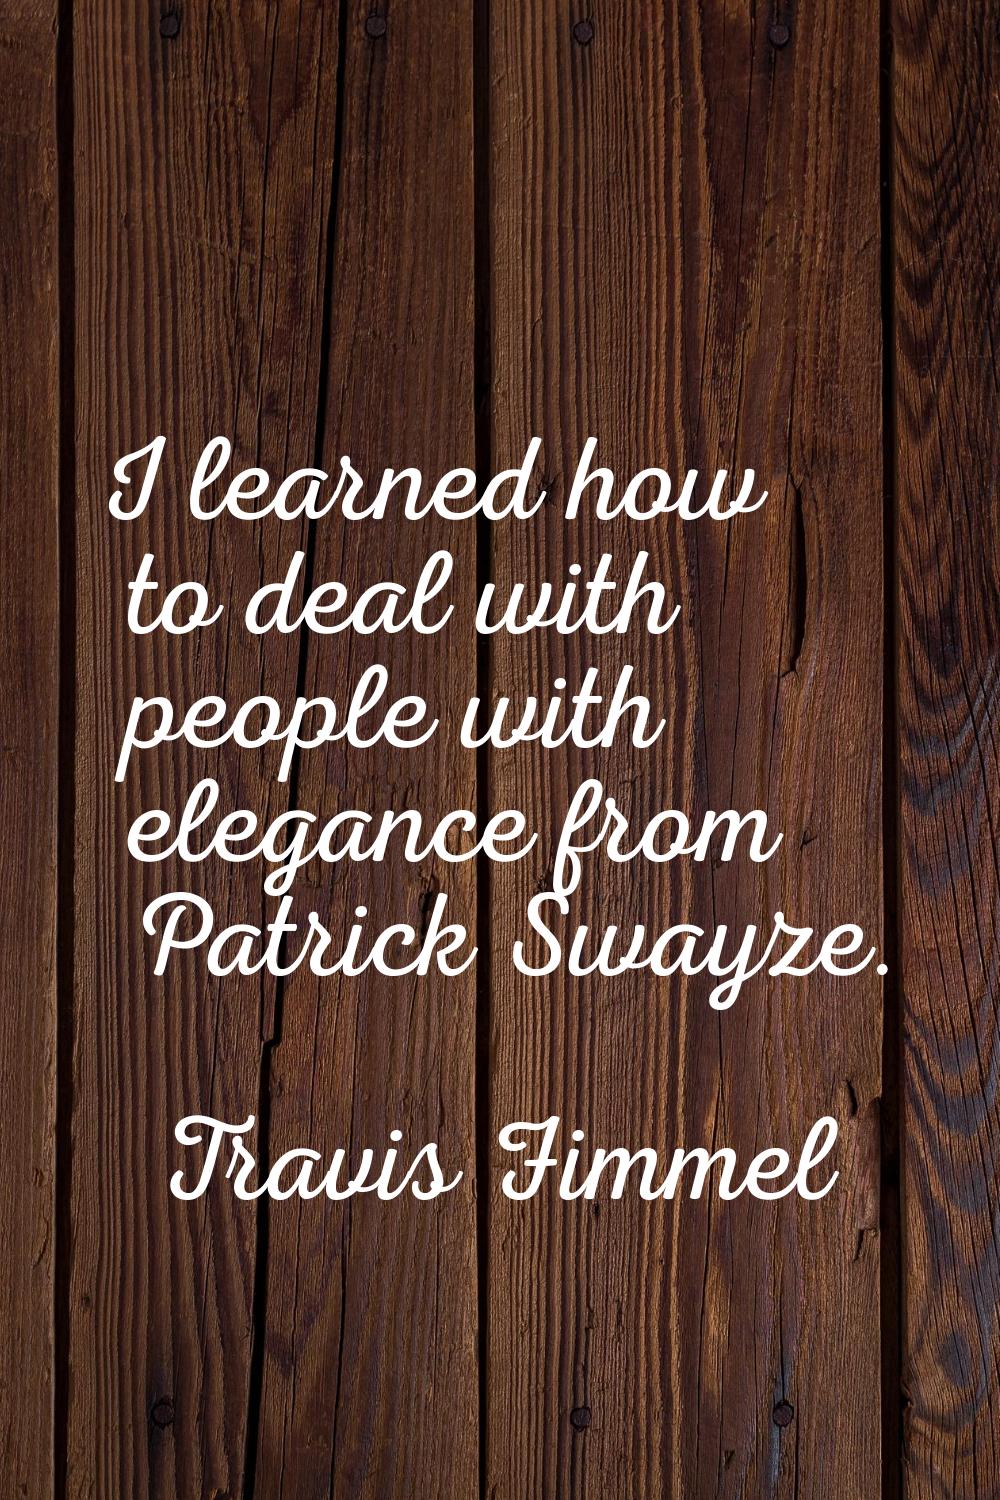 I learned how to deal with people with elegance from Patrick Swayze.